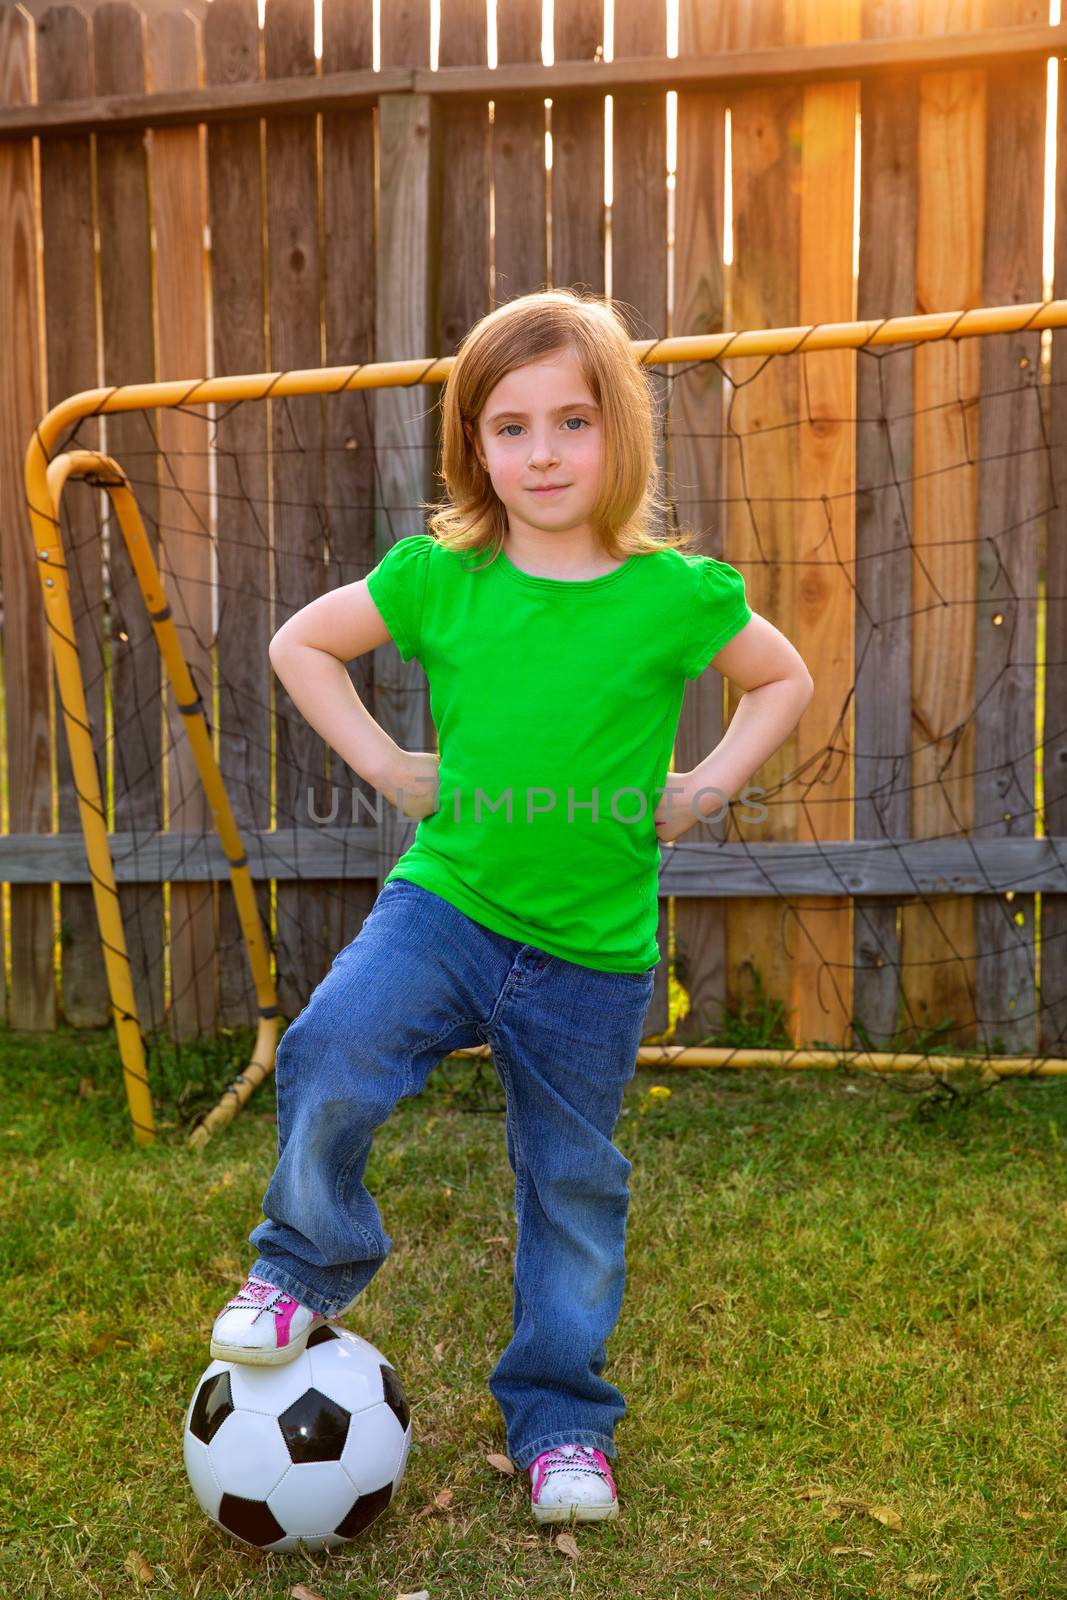 Blond little girl soccer player happy in backyard with ball